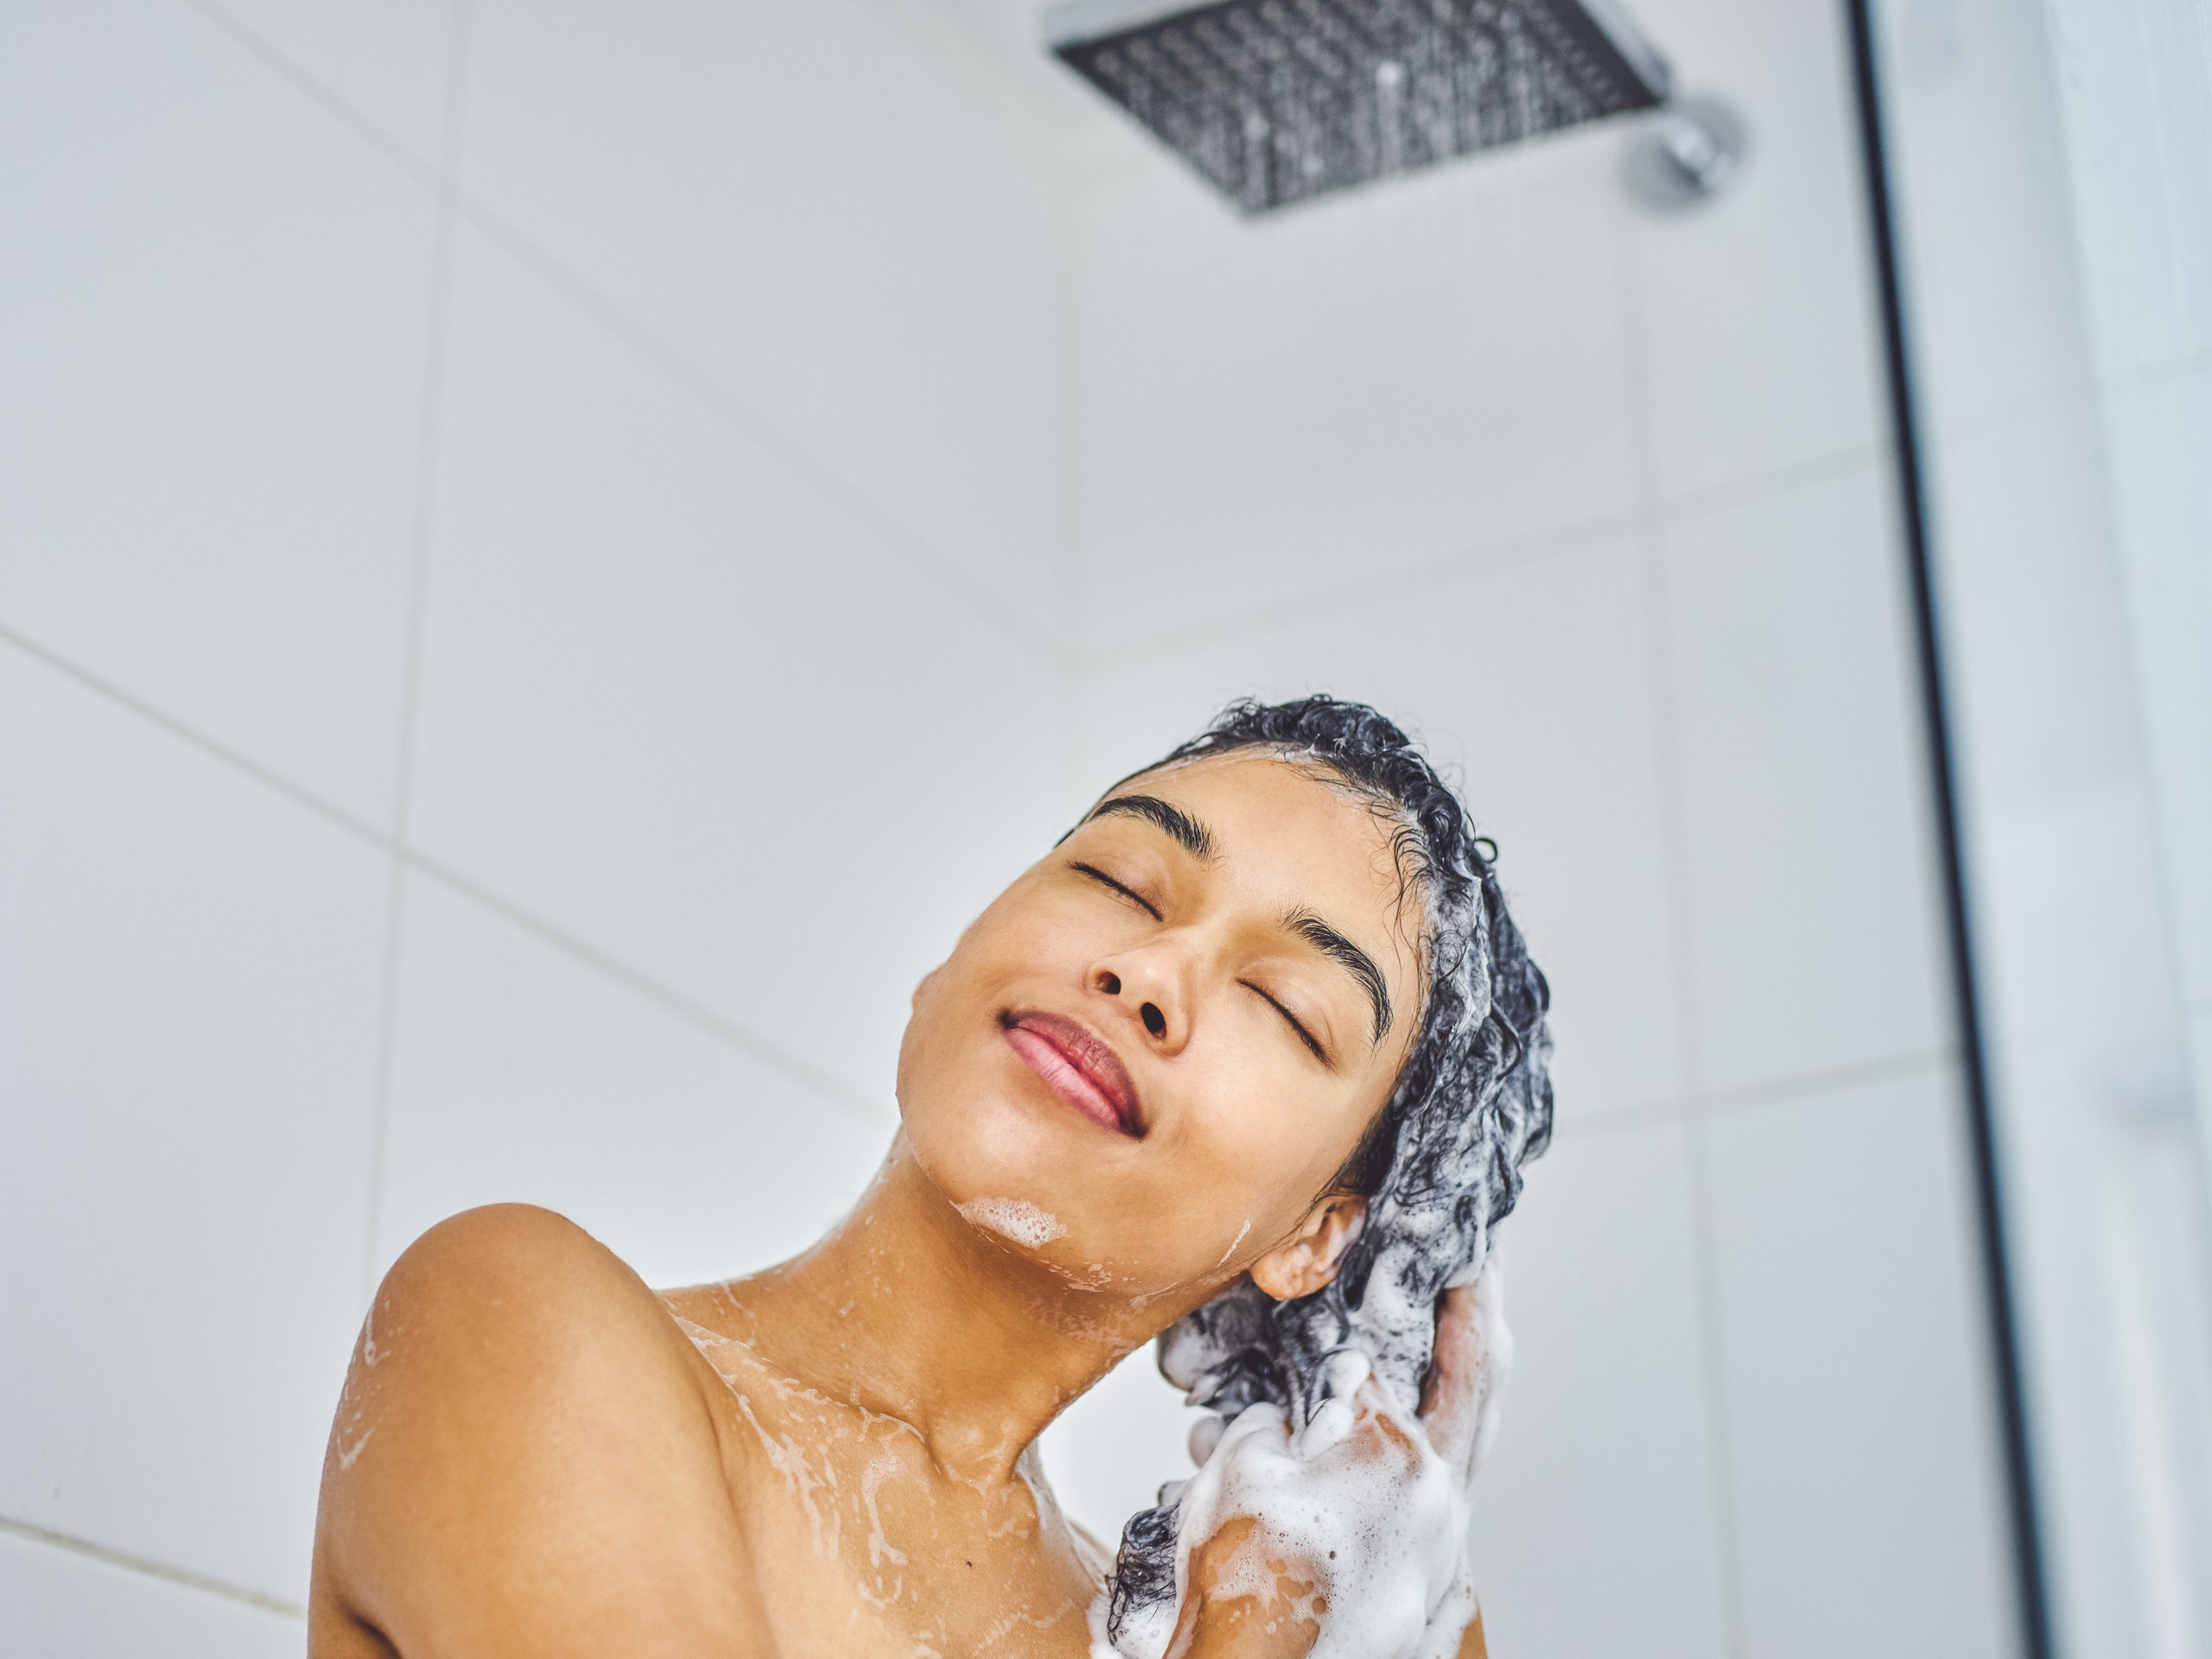 What is the Most Hygienic Thing to Wash Your Body With? 1 ef91e8c06b864d12a1daa4ed8dbd401b ef91e8c06b864d12a1daa4ed8dbd401b